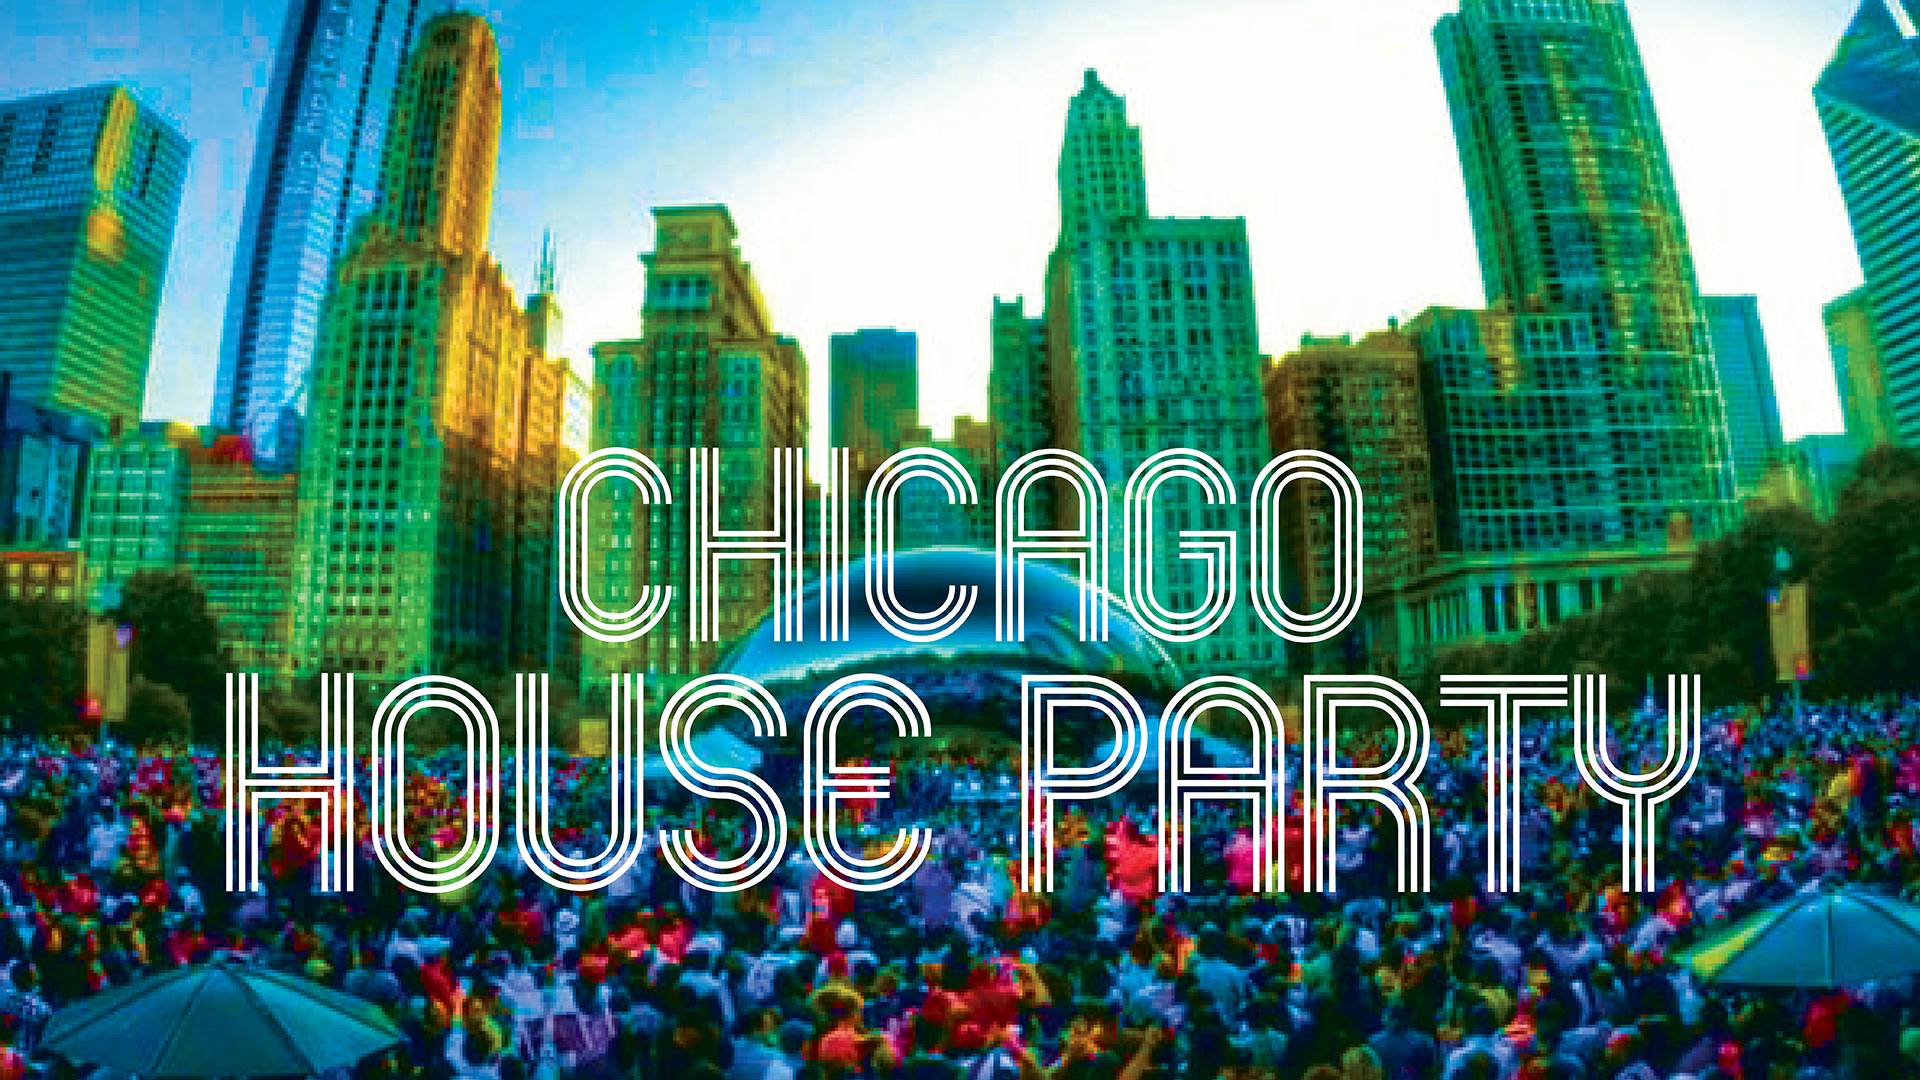 Chicago House Party Free Millennium Park Event To Celebrate House